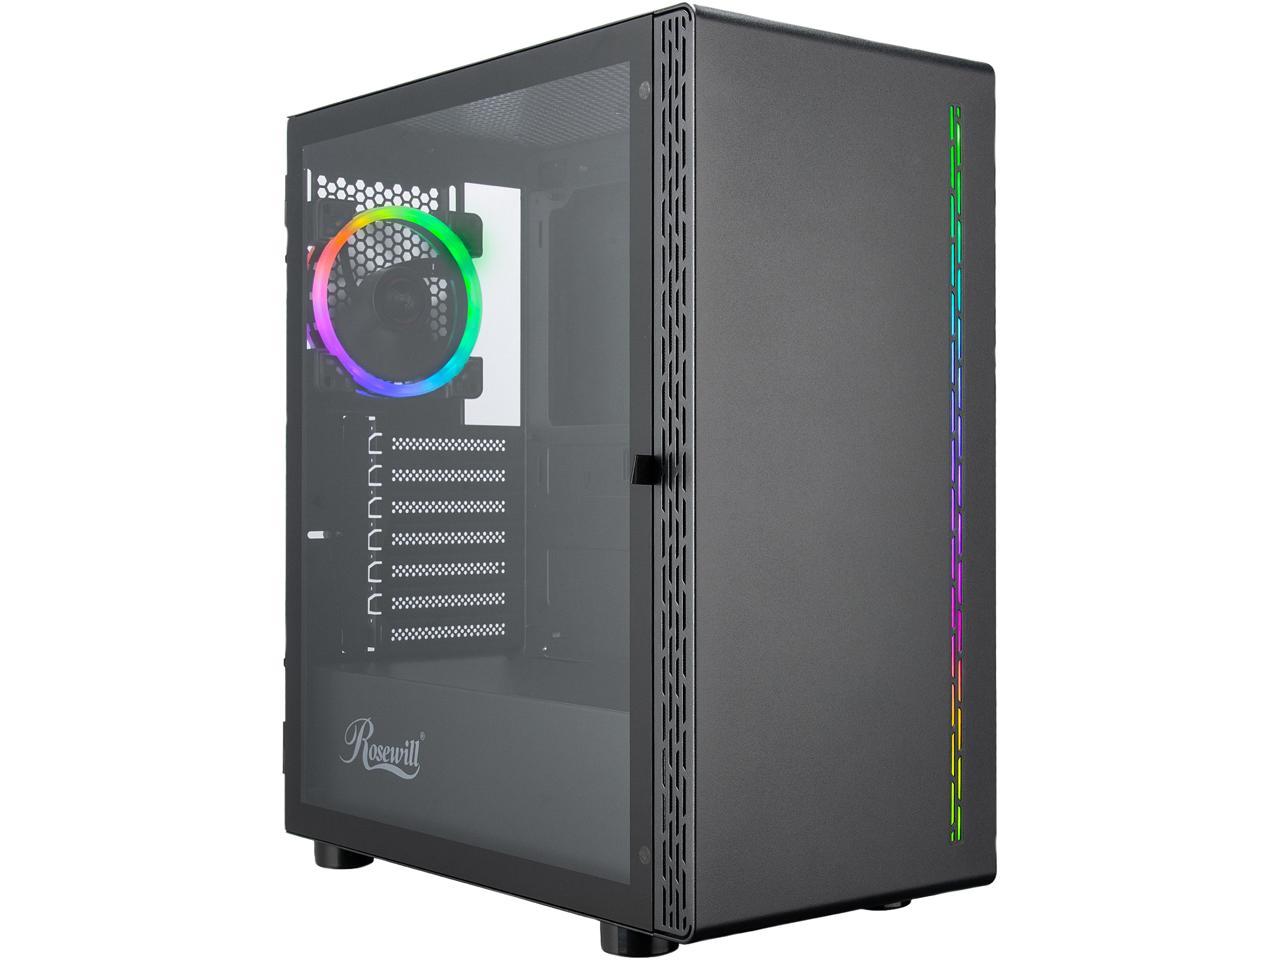 Rosewill Prism M Atx Mid Tower Gaming Pc Computer Case W/ Rgb Fan, 10 Backlit Modes